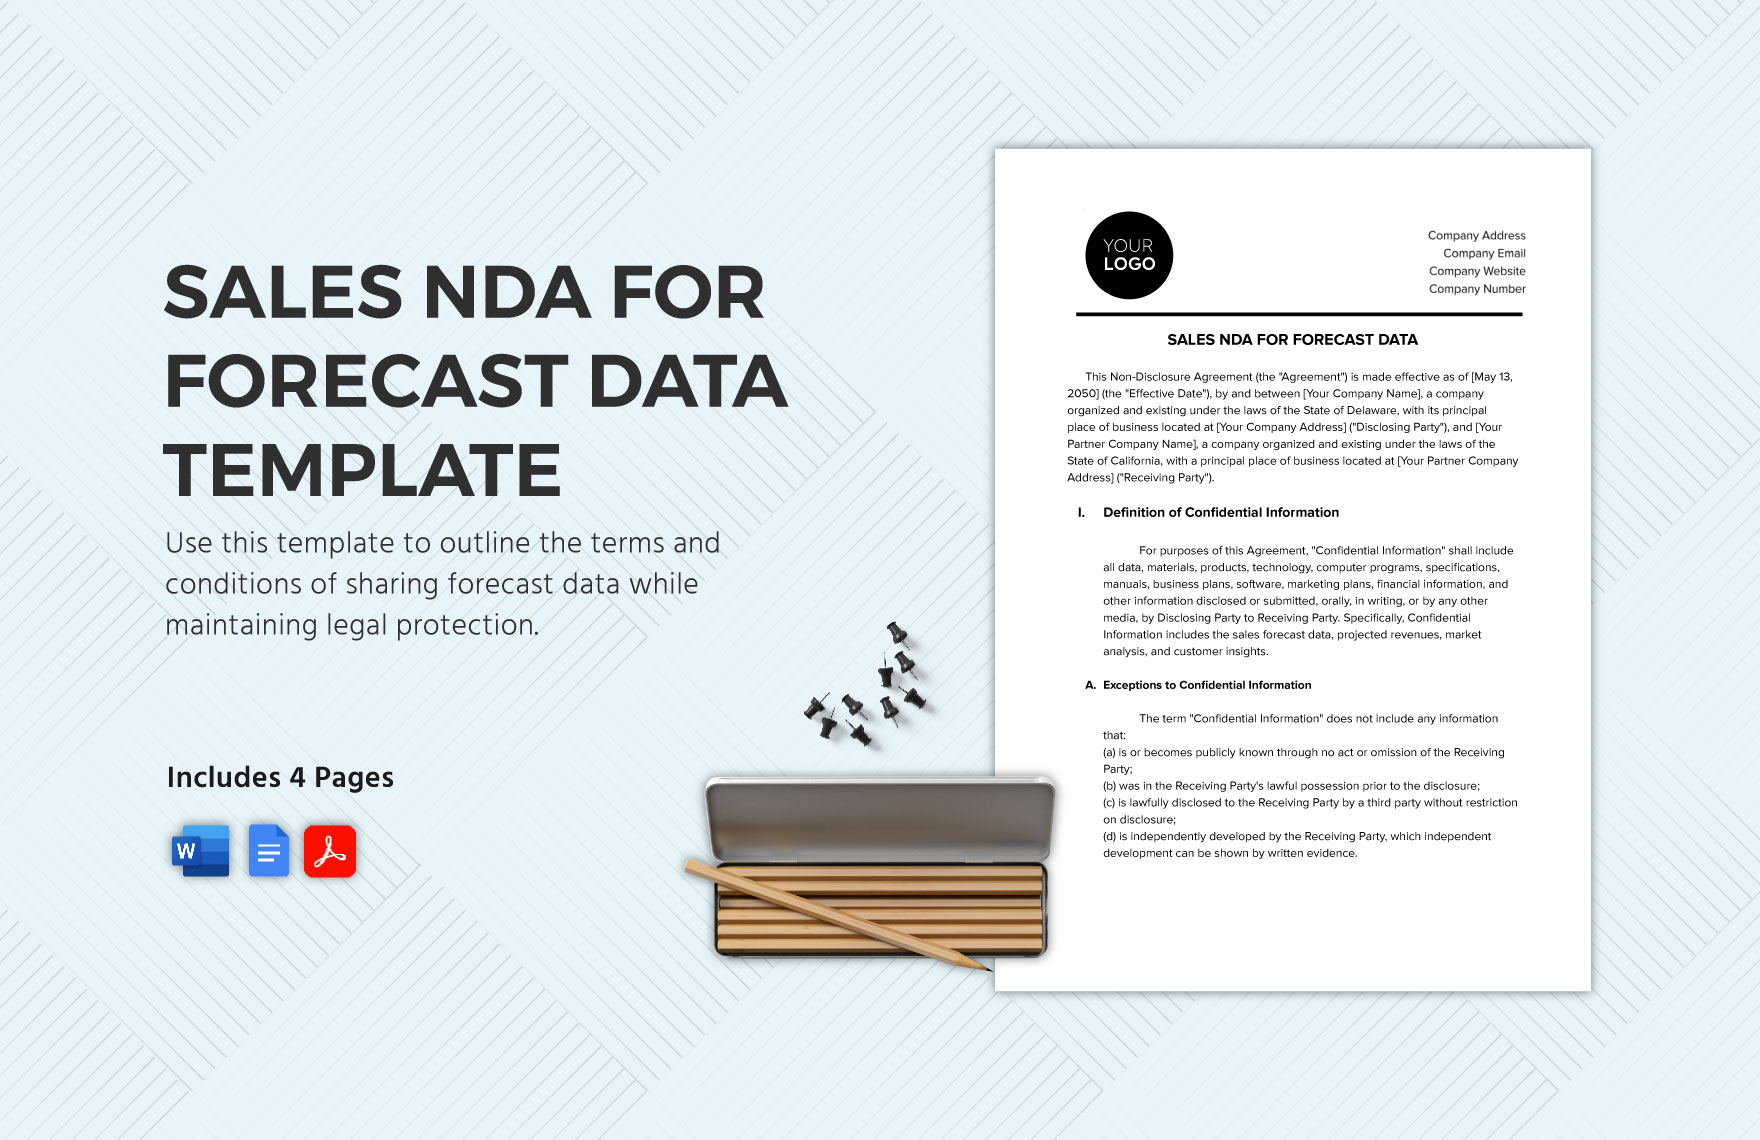 Sales NDA for Forecast Data Template in Word, Google Docs, PDF